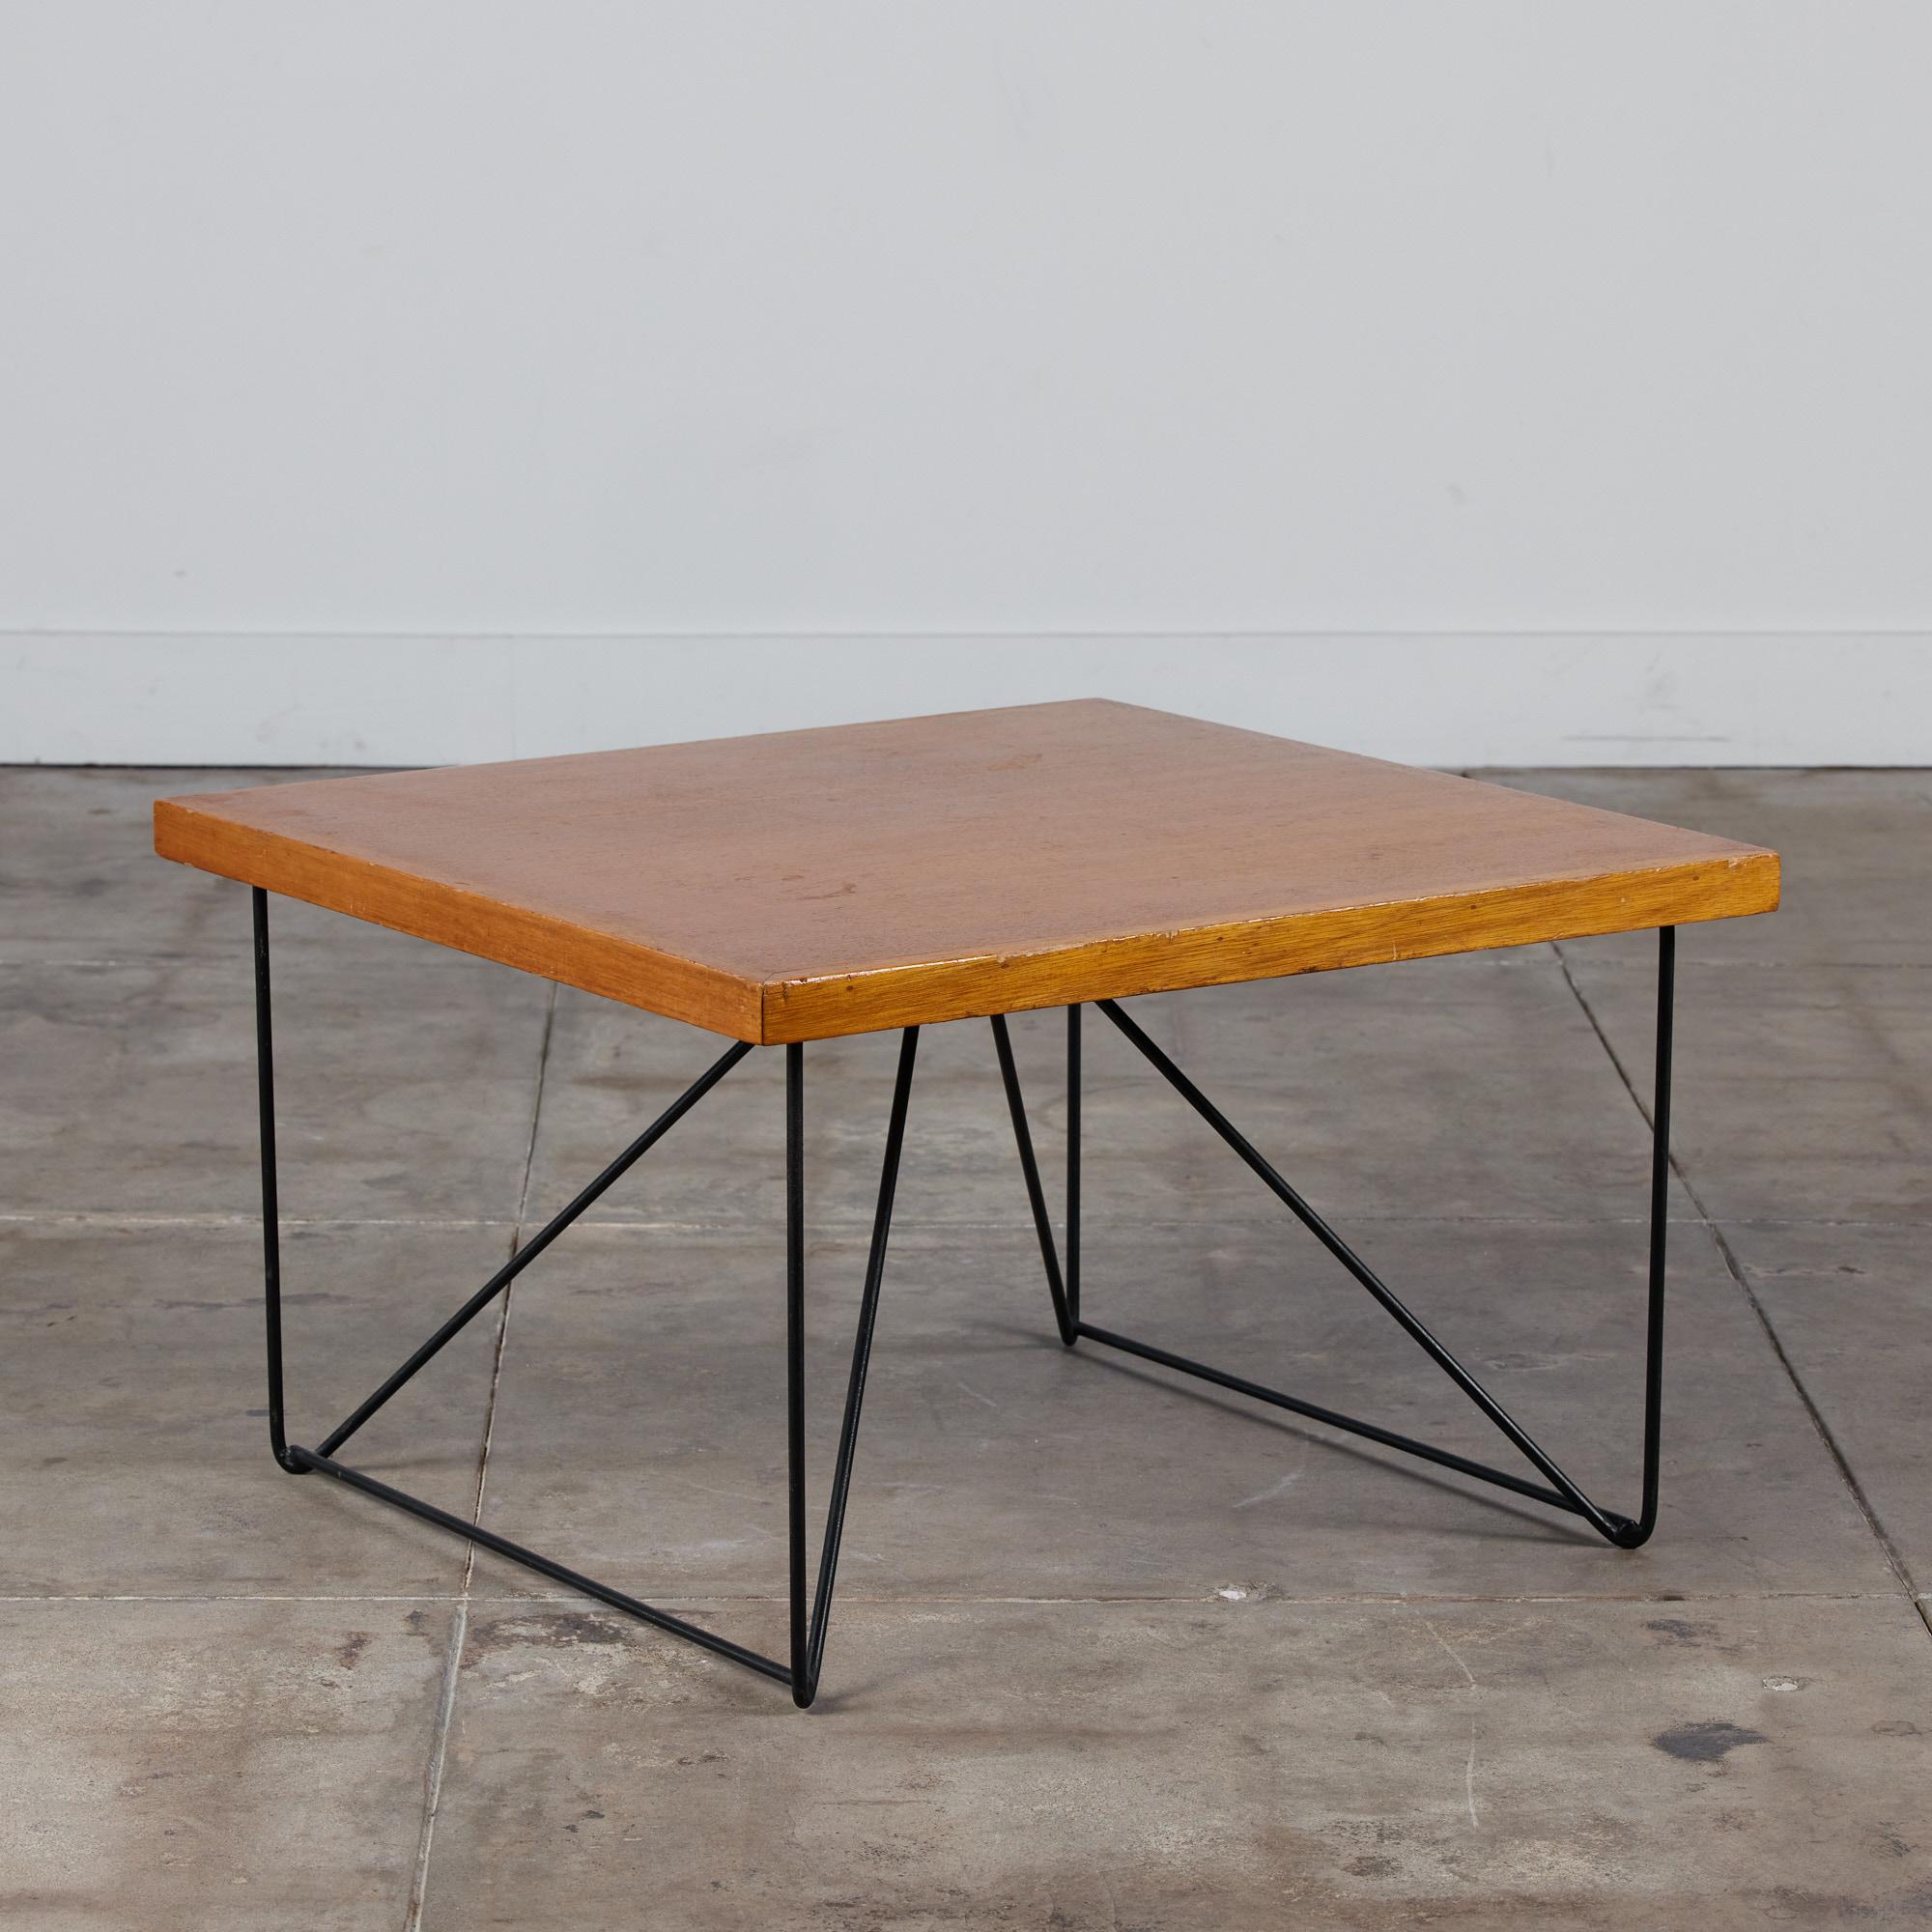 A design by Luther Conover for Pacifica c.1950s, USA. This table features a square mahogany table top set atop iron hairpin legs. A simplistic design that can easily be used as both a coffee table or side table.

Dimensions: 30